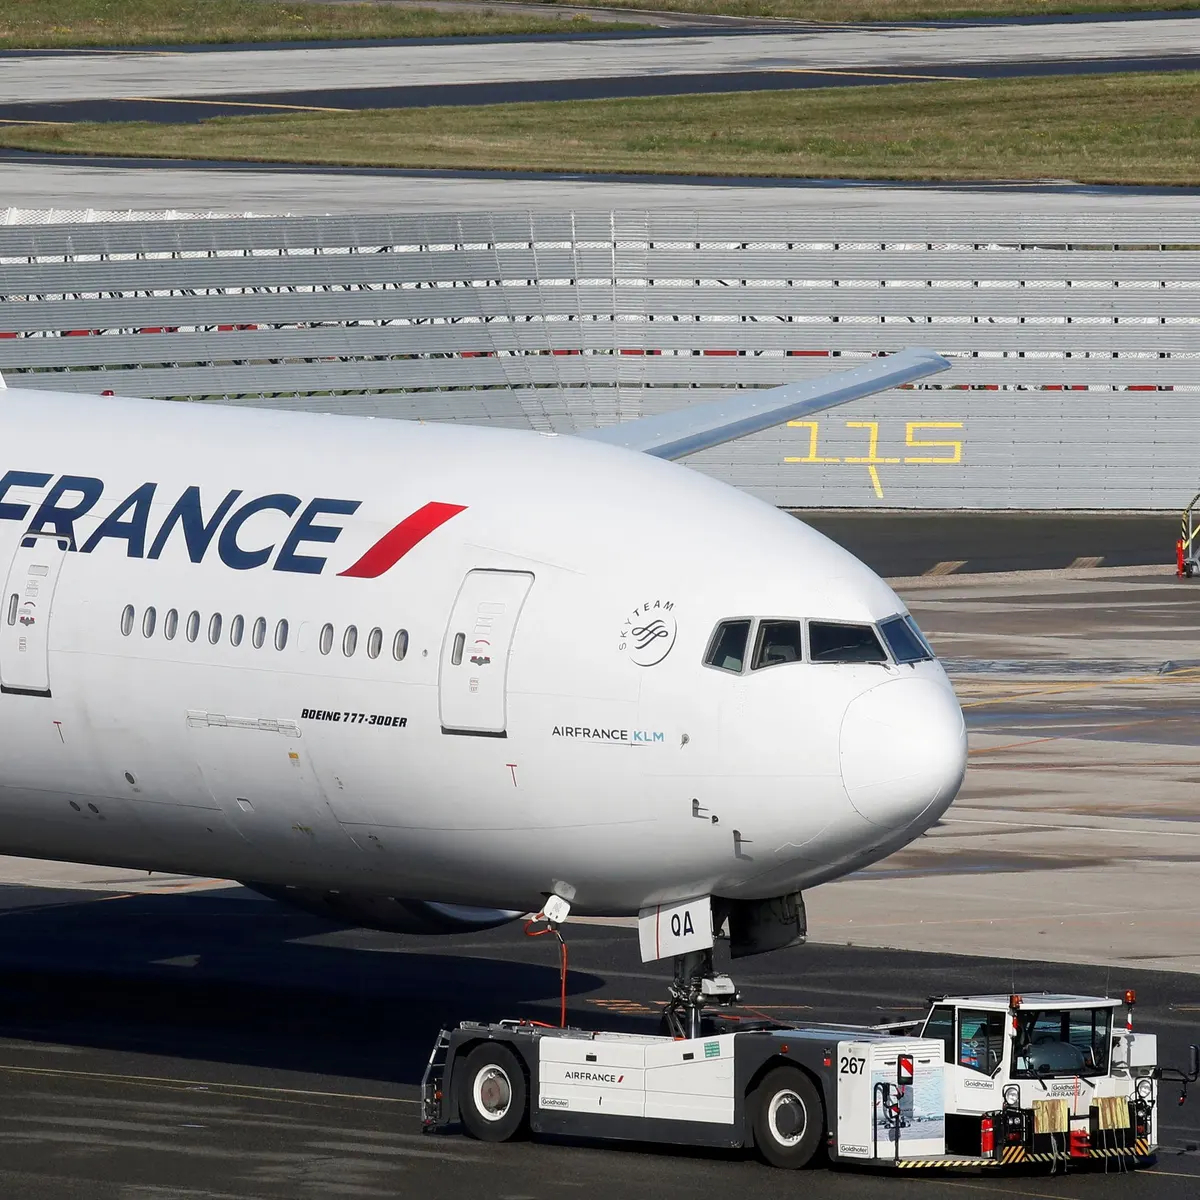 Two Air France Pilots Suspended After A Fight In Cockpit